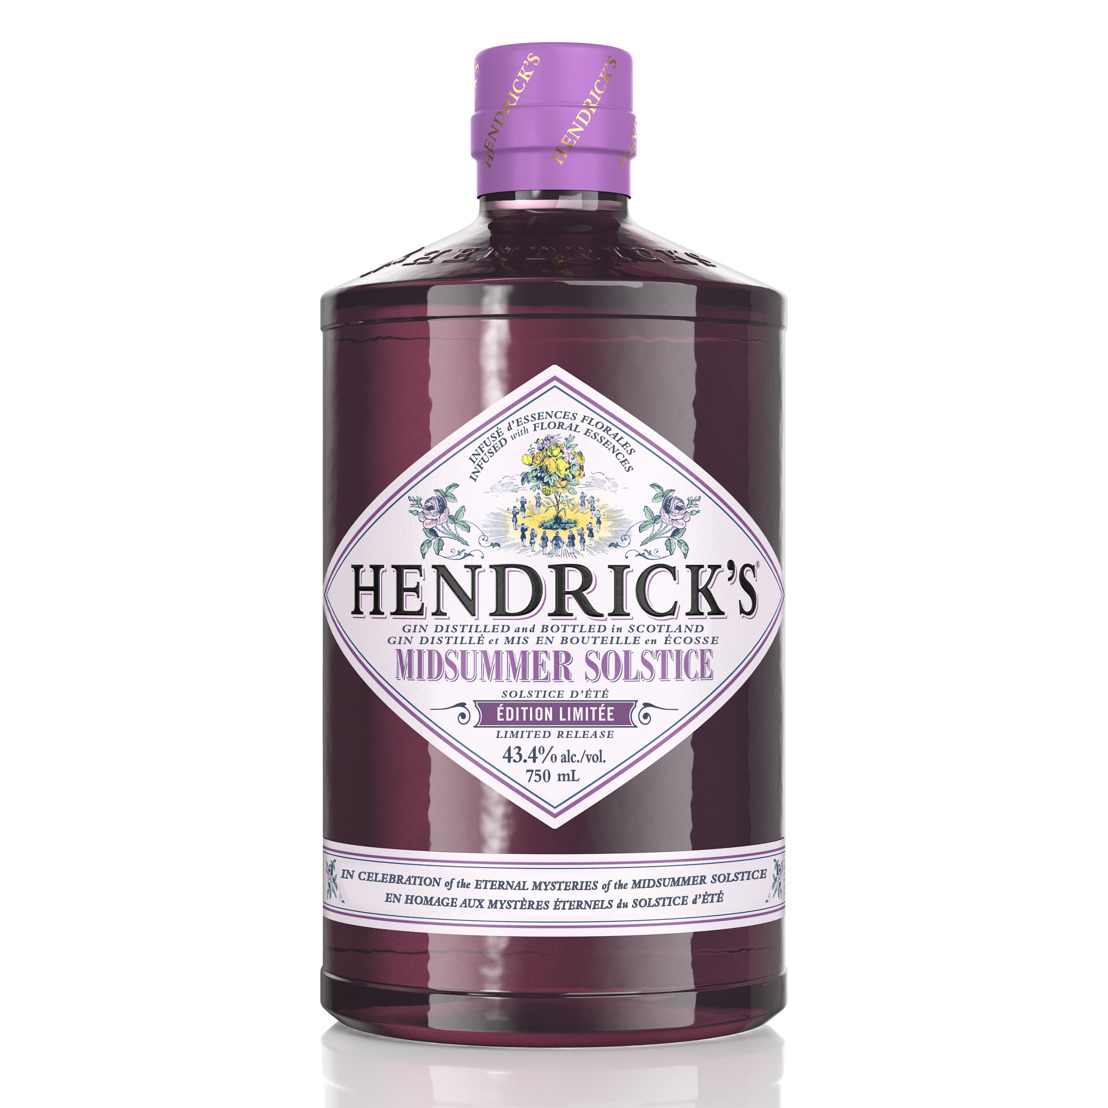 HENDRICK’S GIN AWAKENS NATURE’S MOST VIVID BLOOMS THIS HOLIDAY SEASON WITH THE RARE RELEASE OF ‘MIDSUMMER SOLSTICE,’ A MOST WHIMSICAL AND DELECTABLY FLORAL GIN.